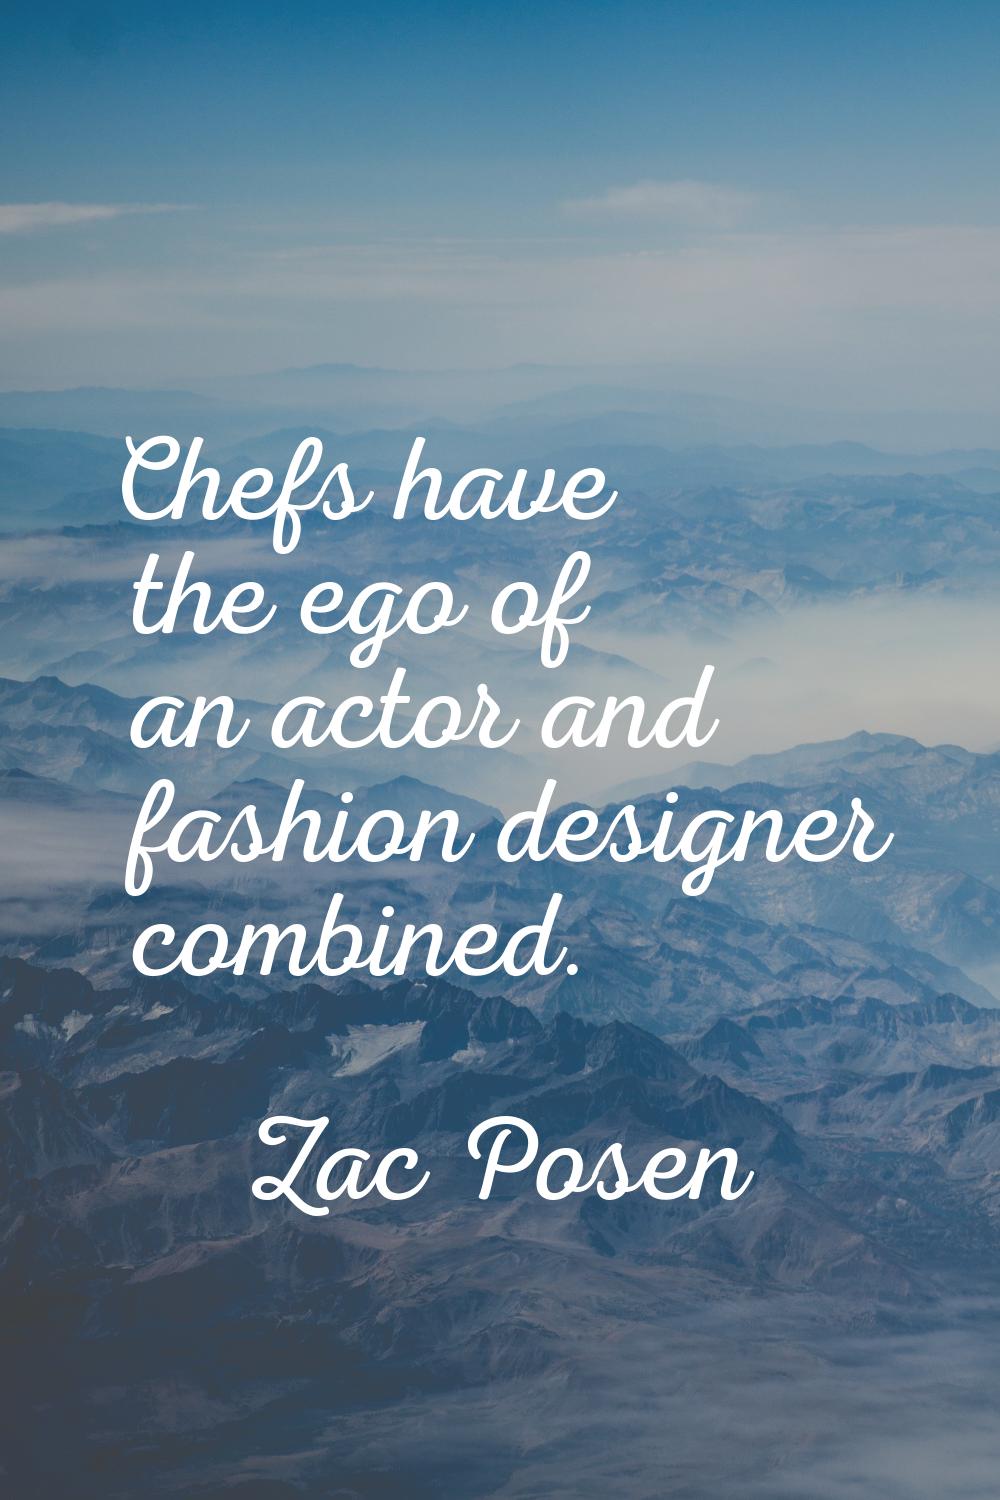 Chefs have the ego of an actor and fashion designer combined.